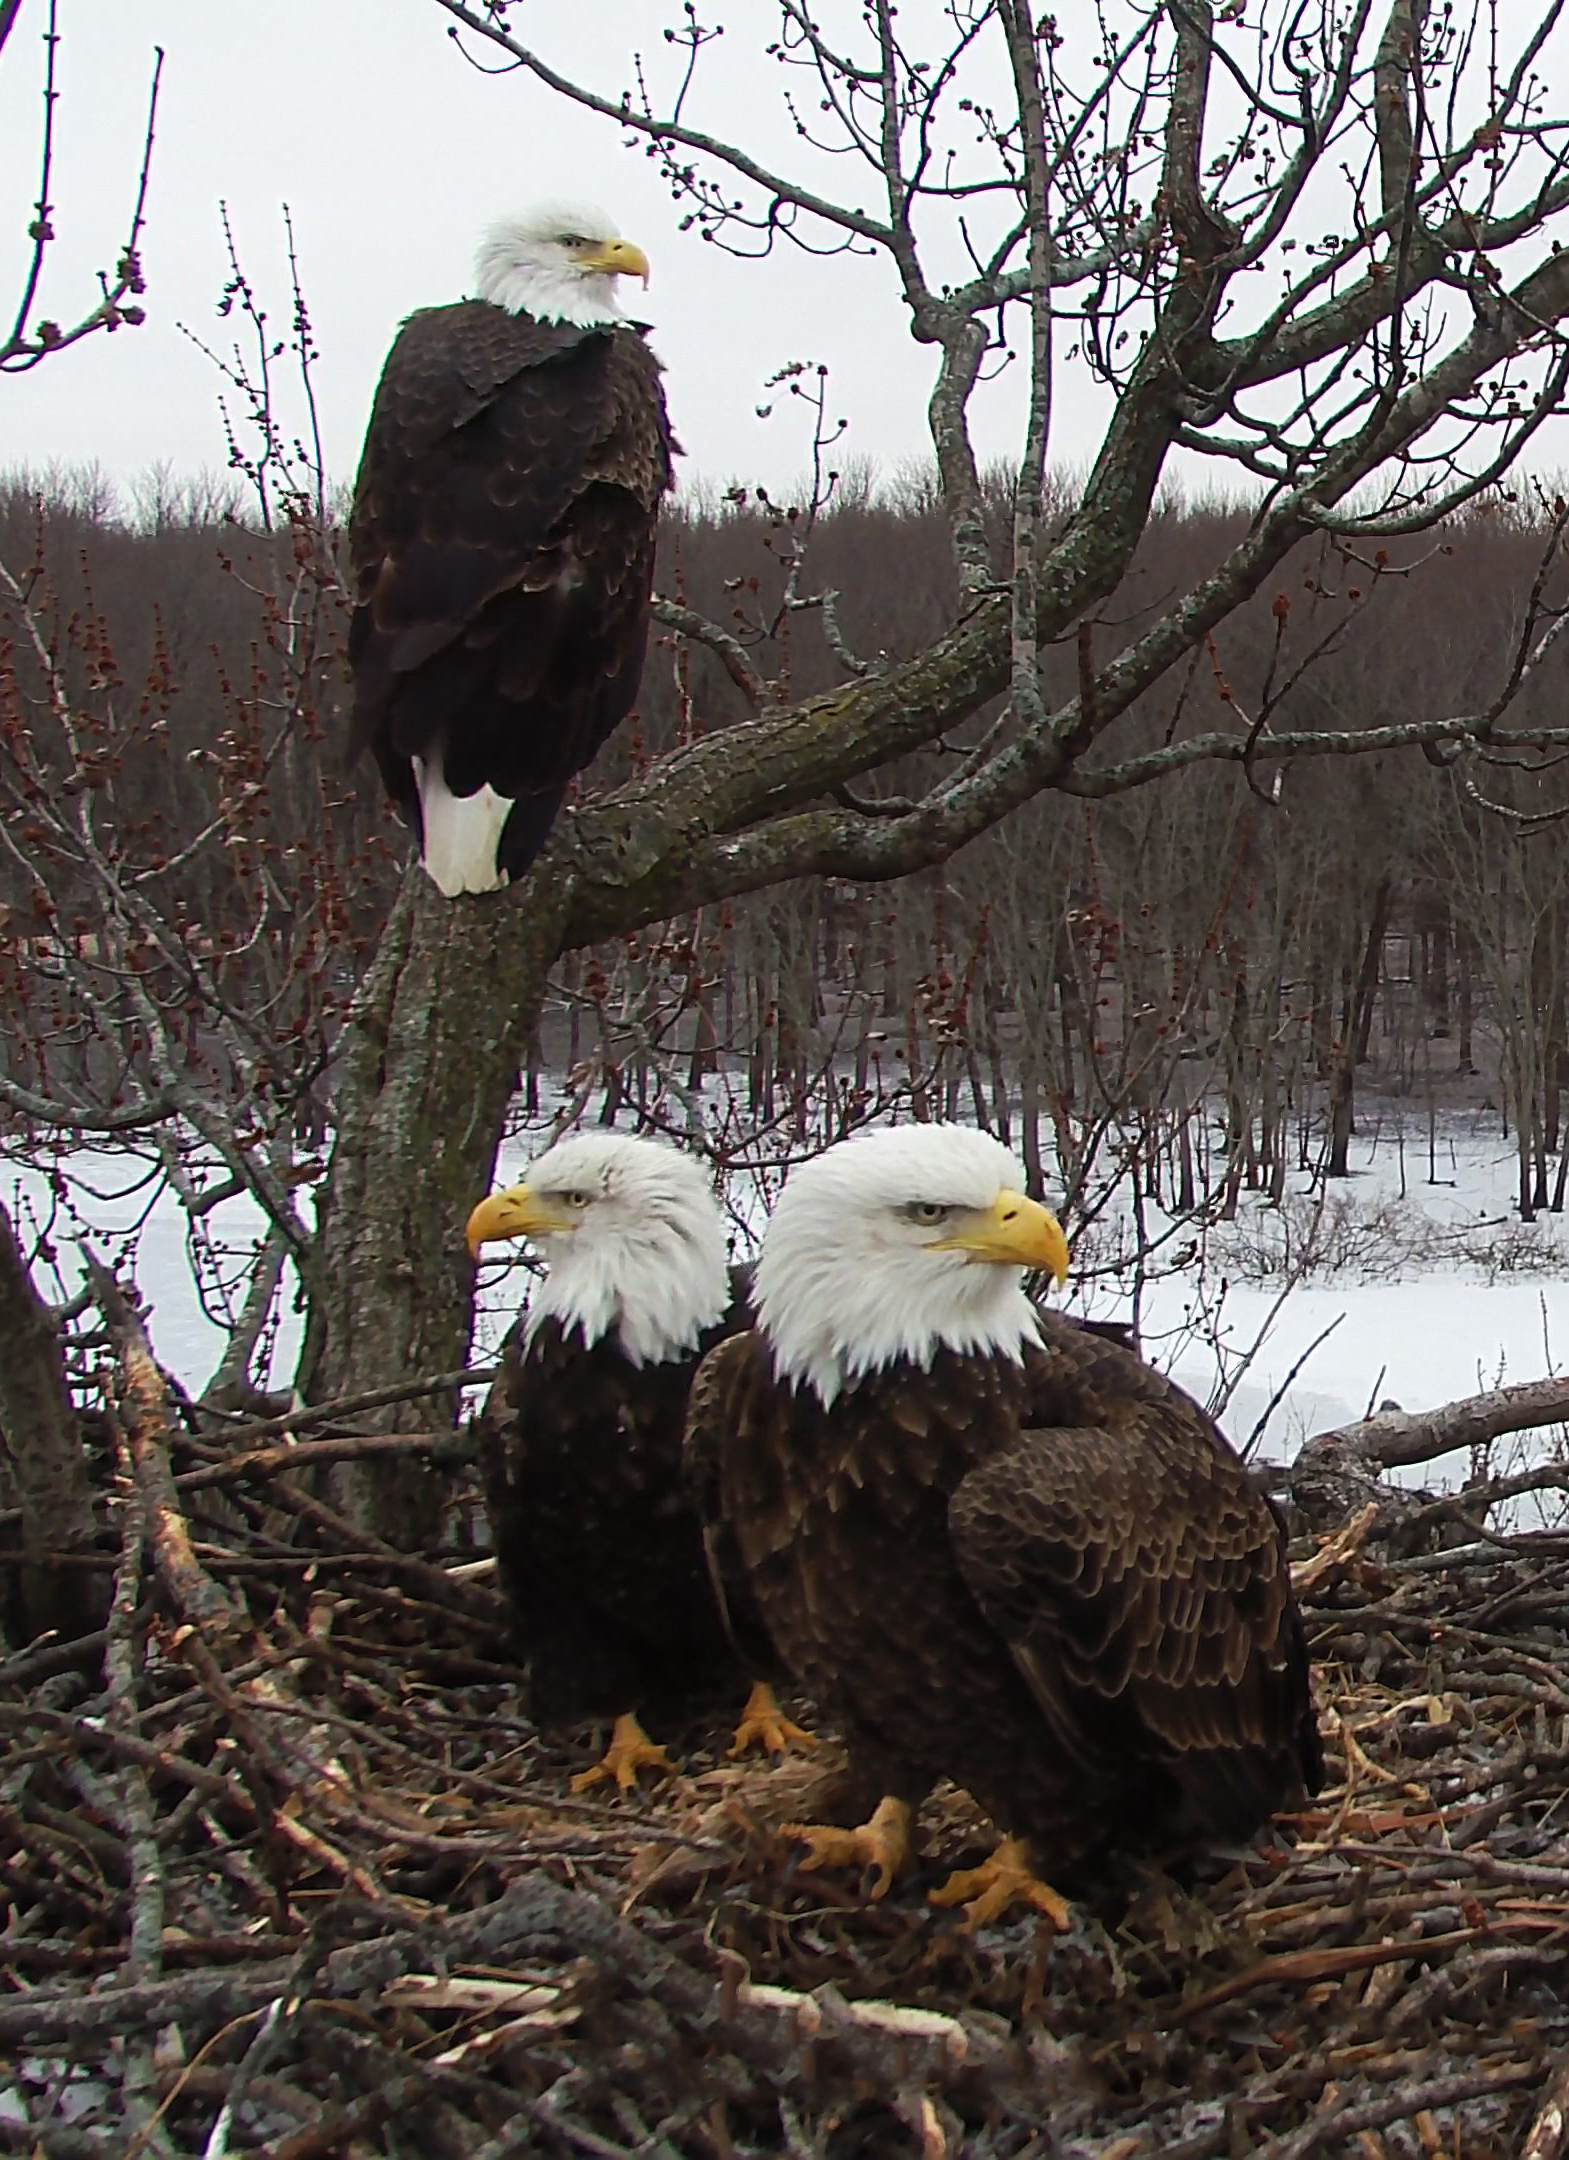 Three adult bald eagles in a nest